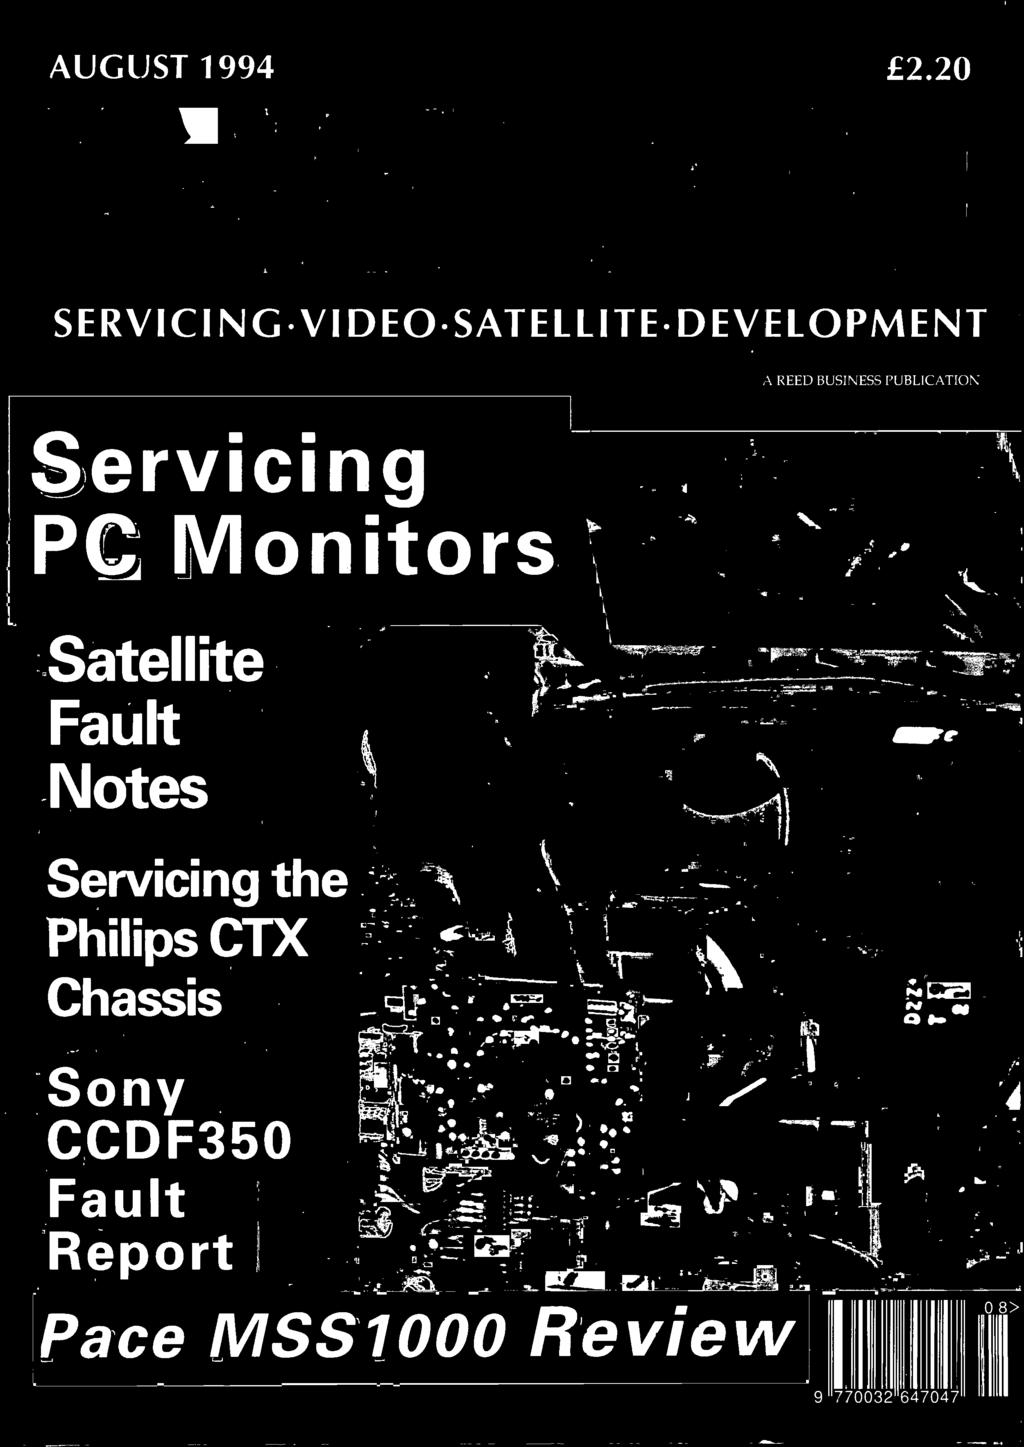 Monitors *4wisft Satellite Fault Notes